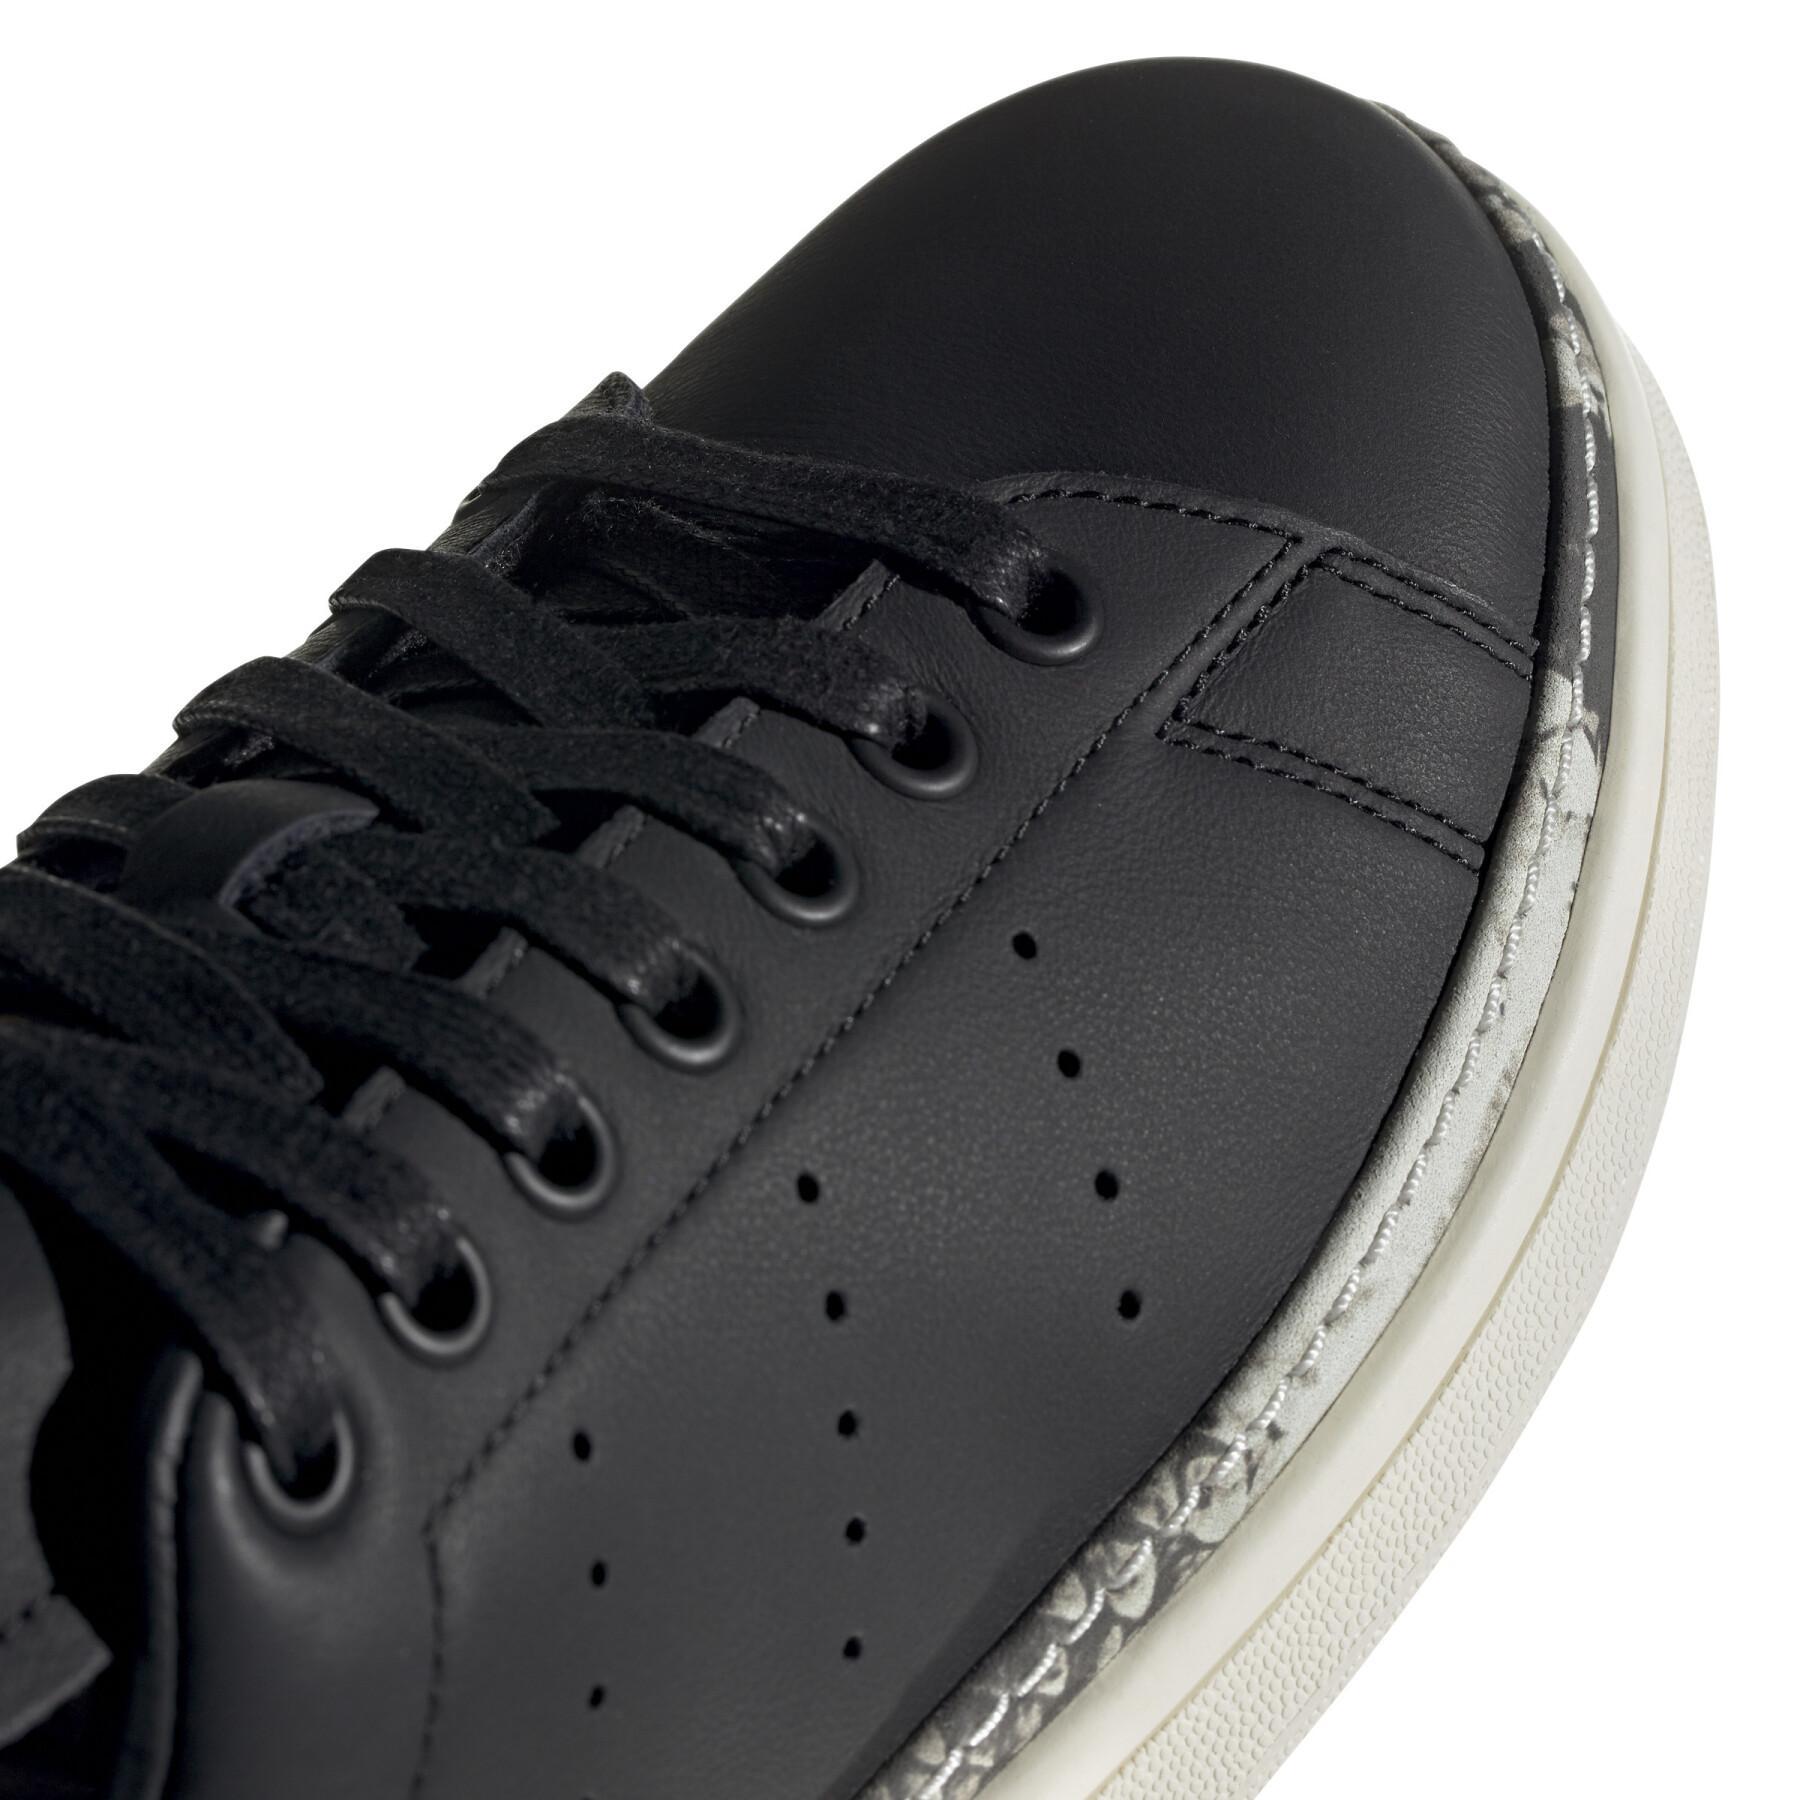 Women's sneakers adidas Stan Smith New Bold